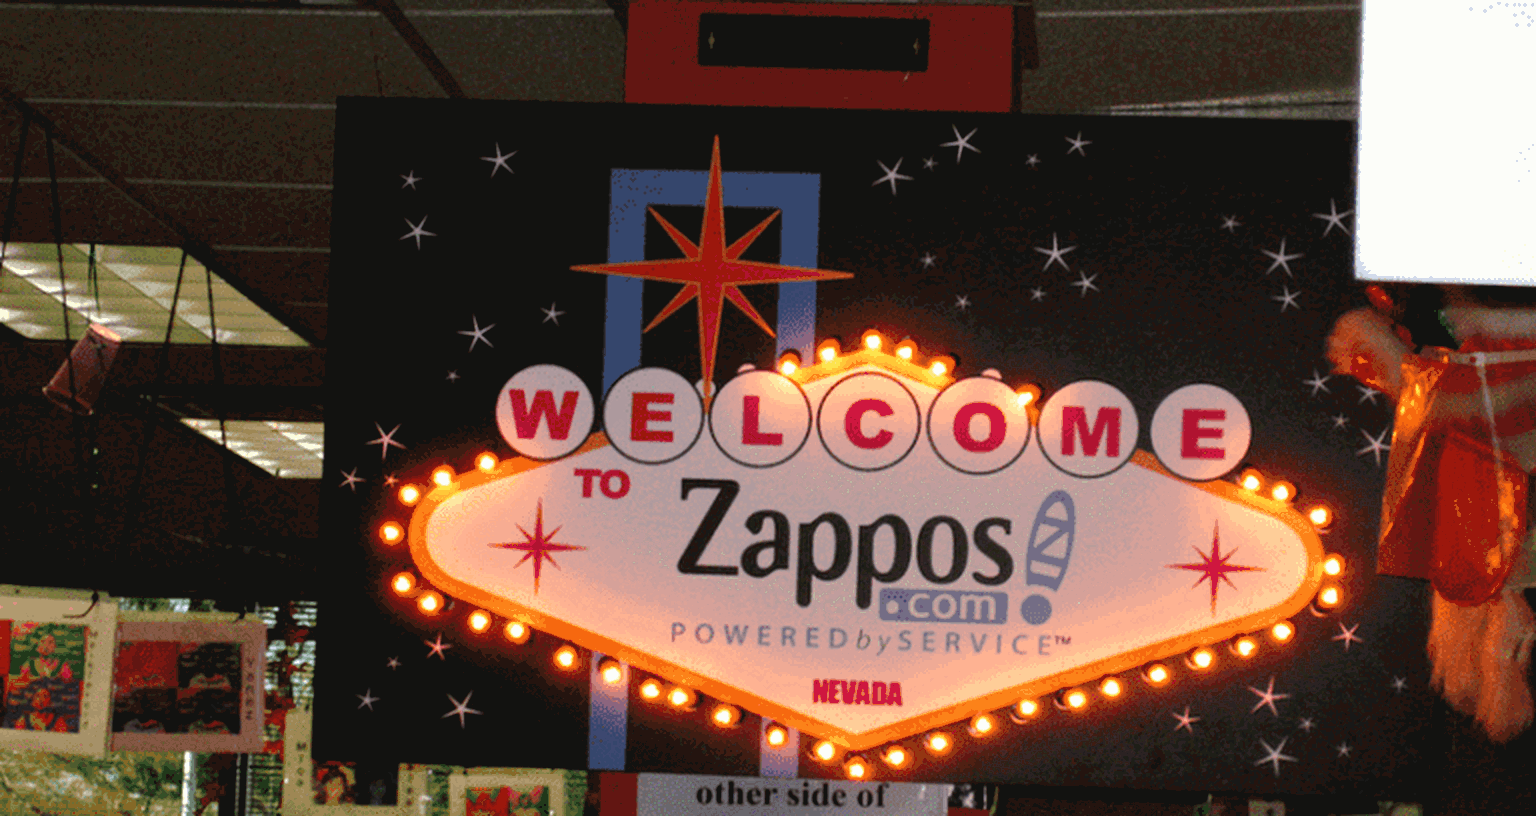 Tony Hsieh’s Zappos Offers to Pay All Funeral Costs of Las Vegas Massacre Victims